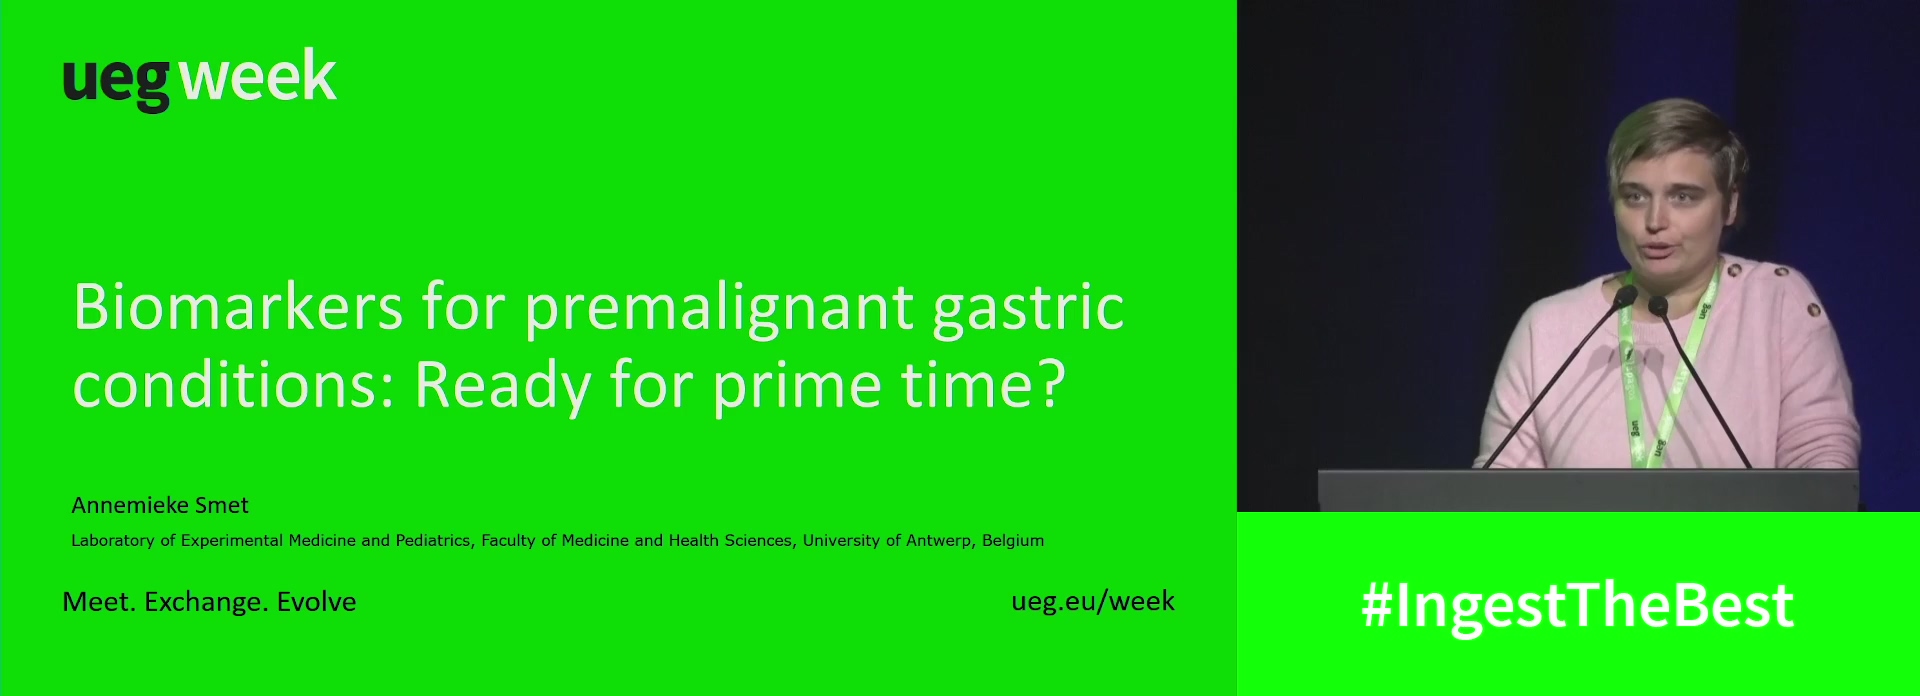 Biomarkers for premalignant gastric conditions: Ready for prime time?